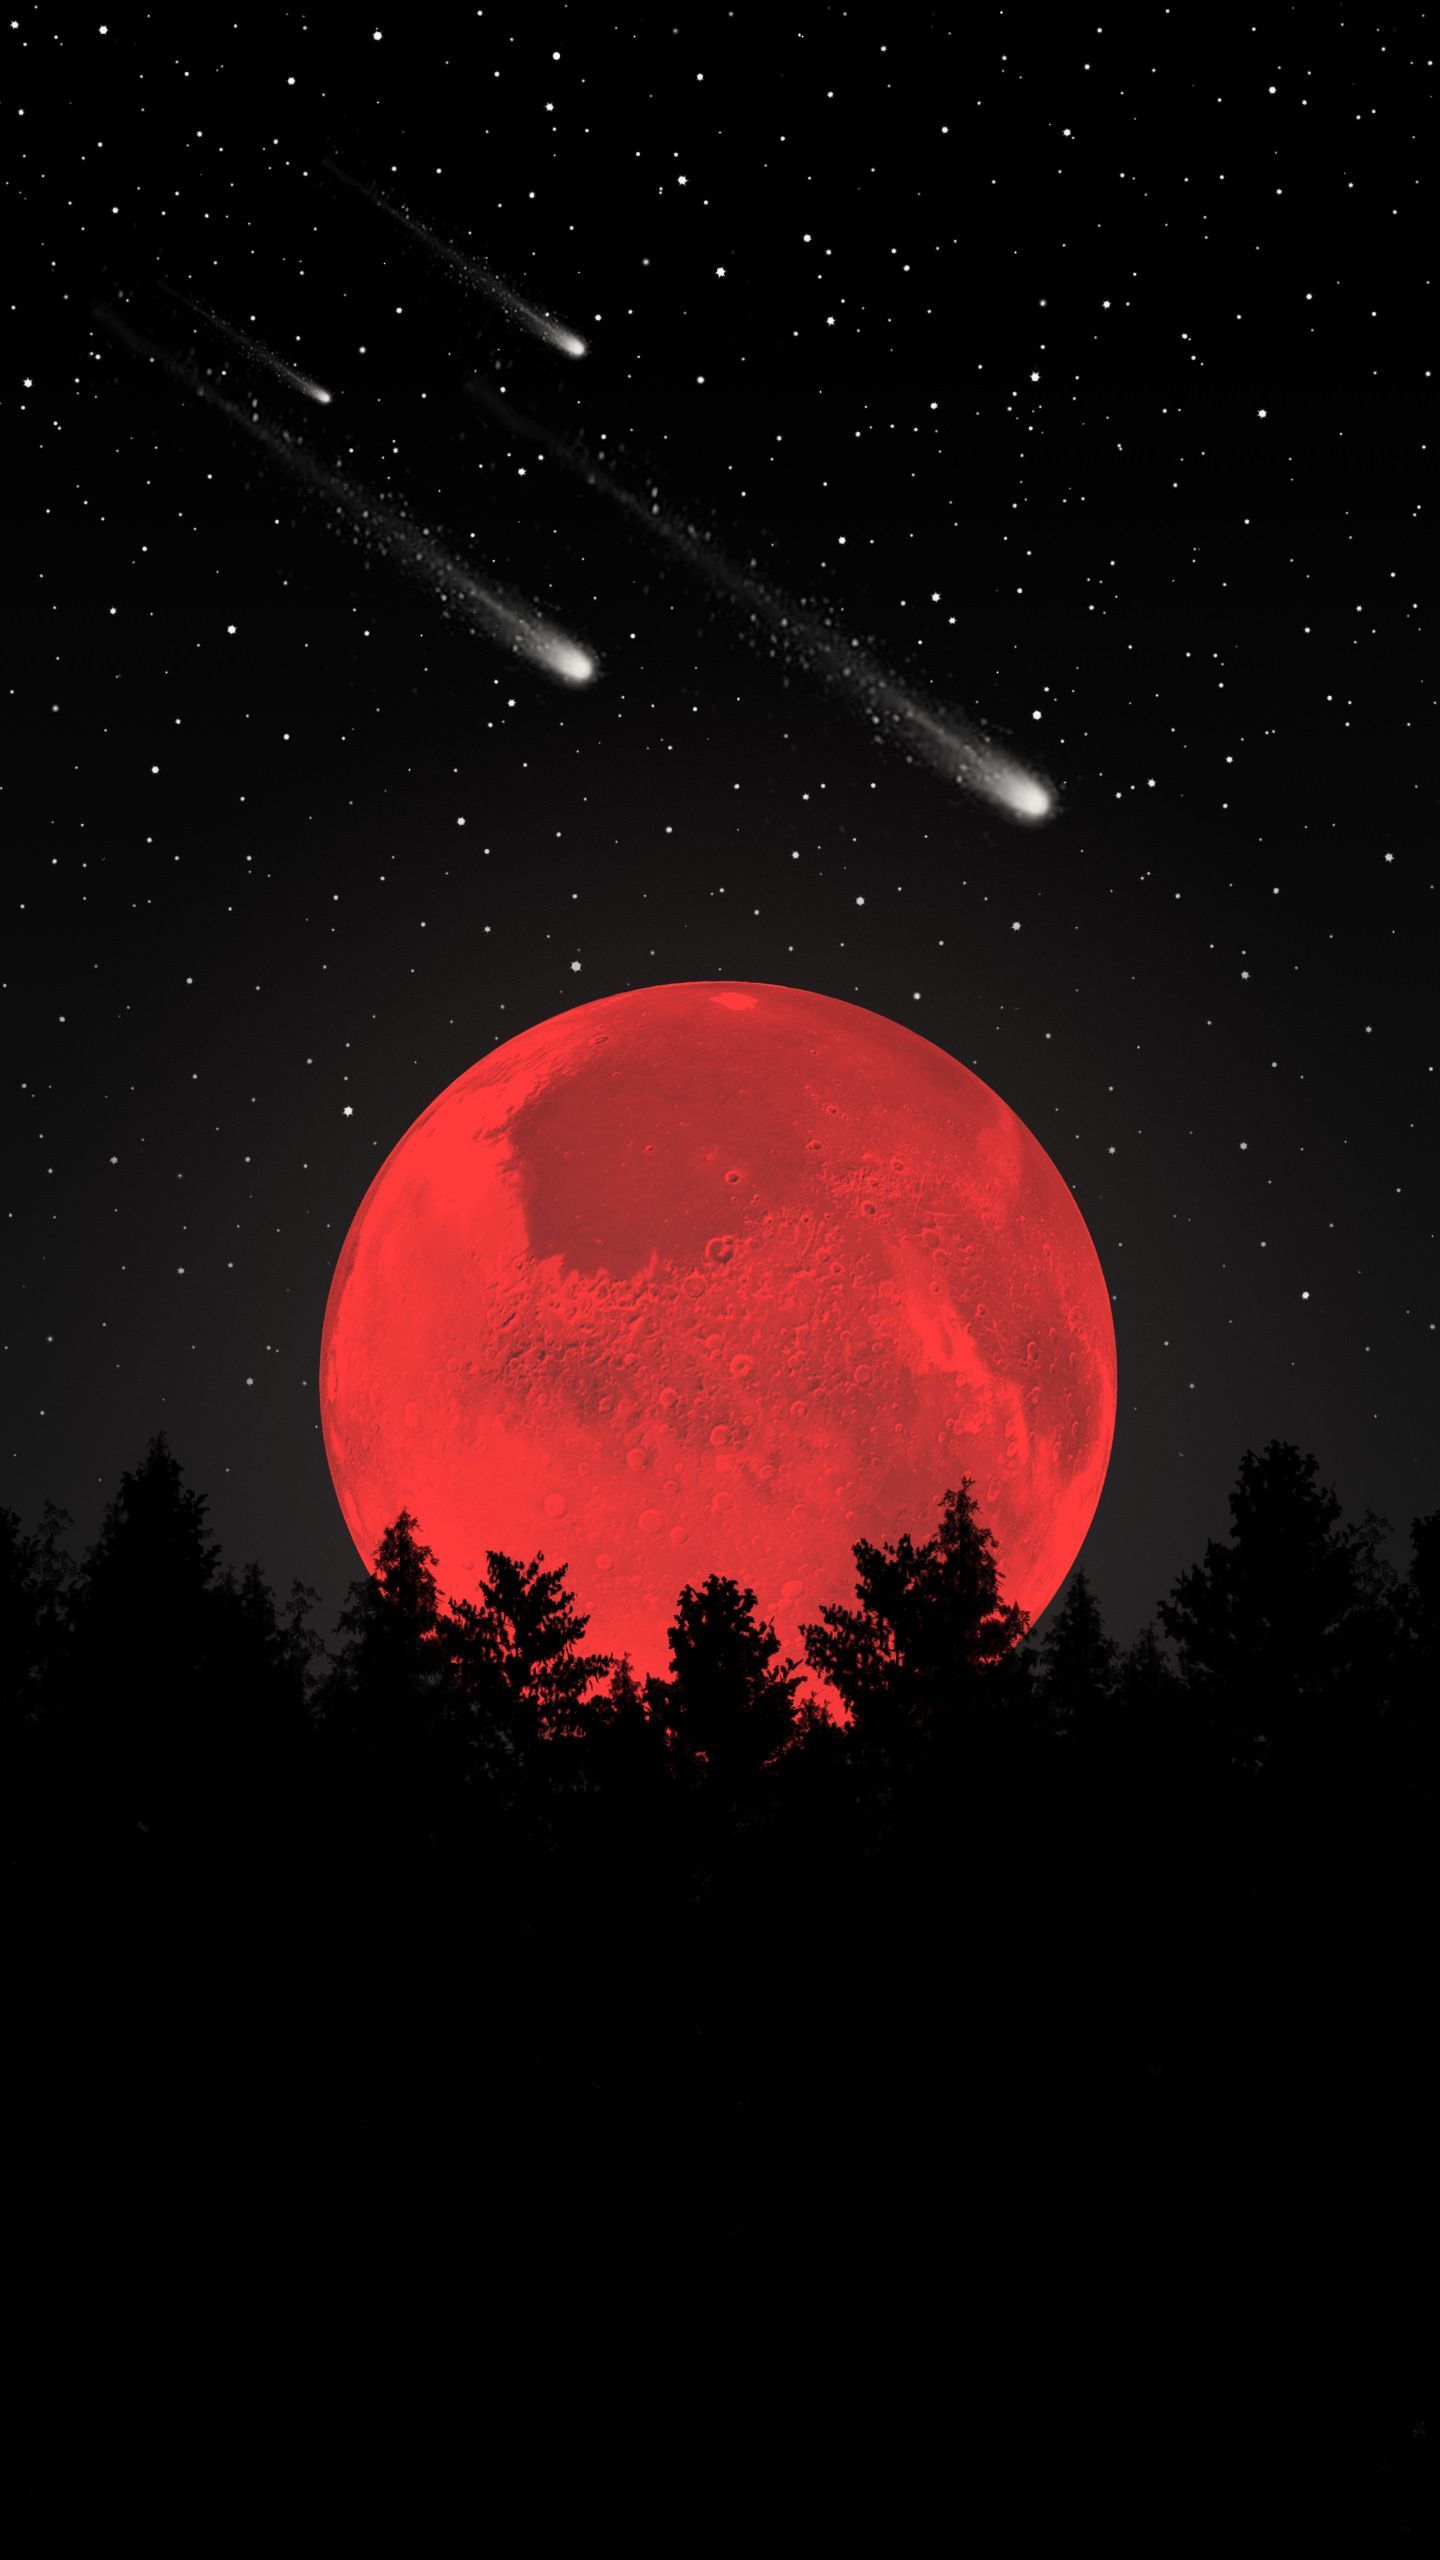 A red full moon rises over a forest of trees - Crimson